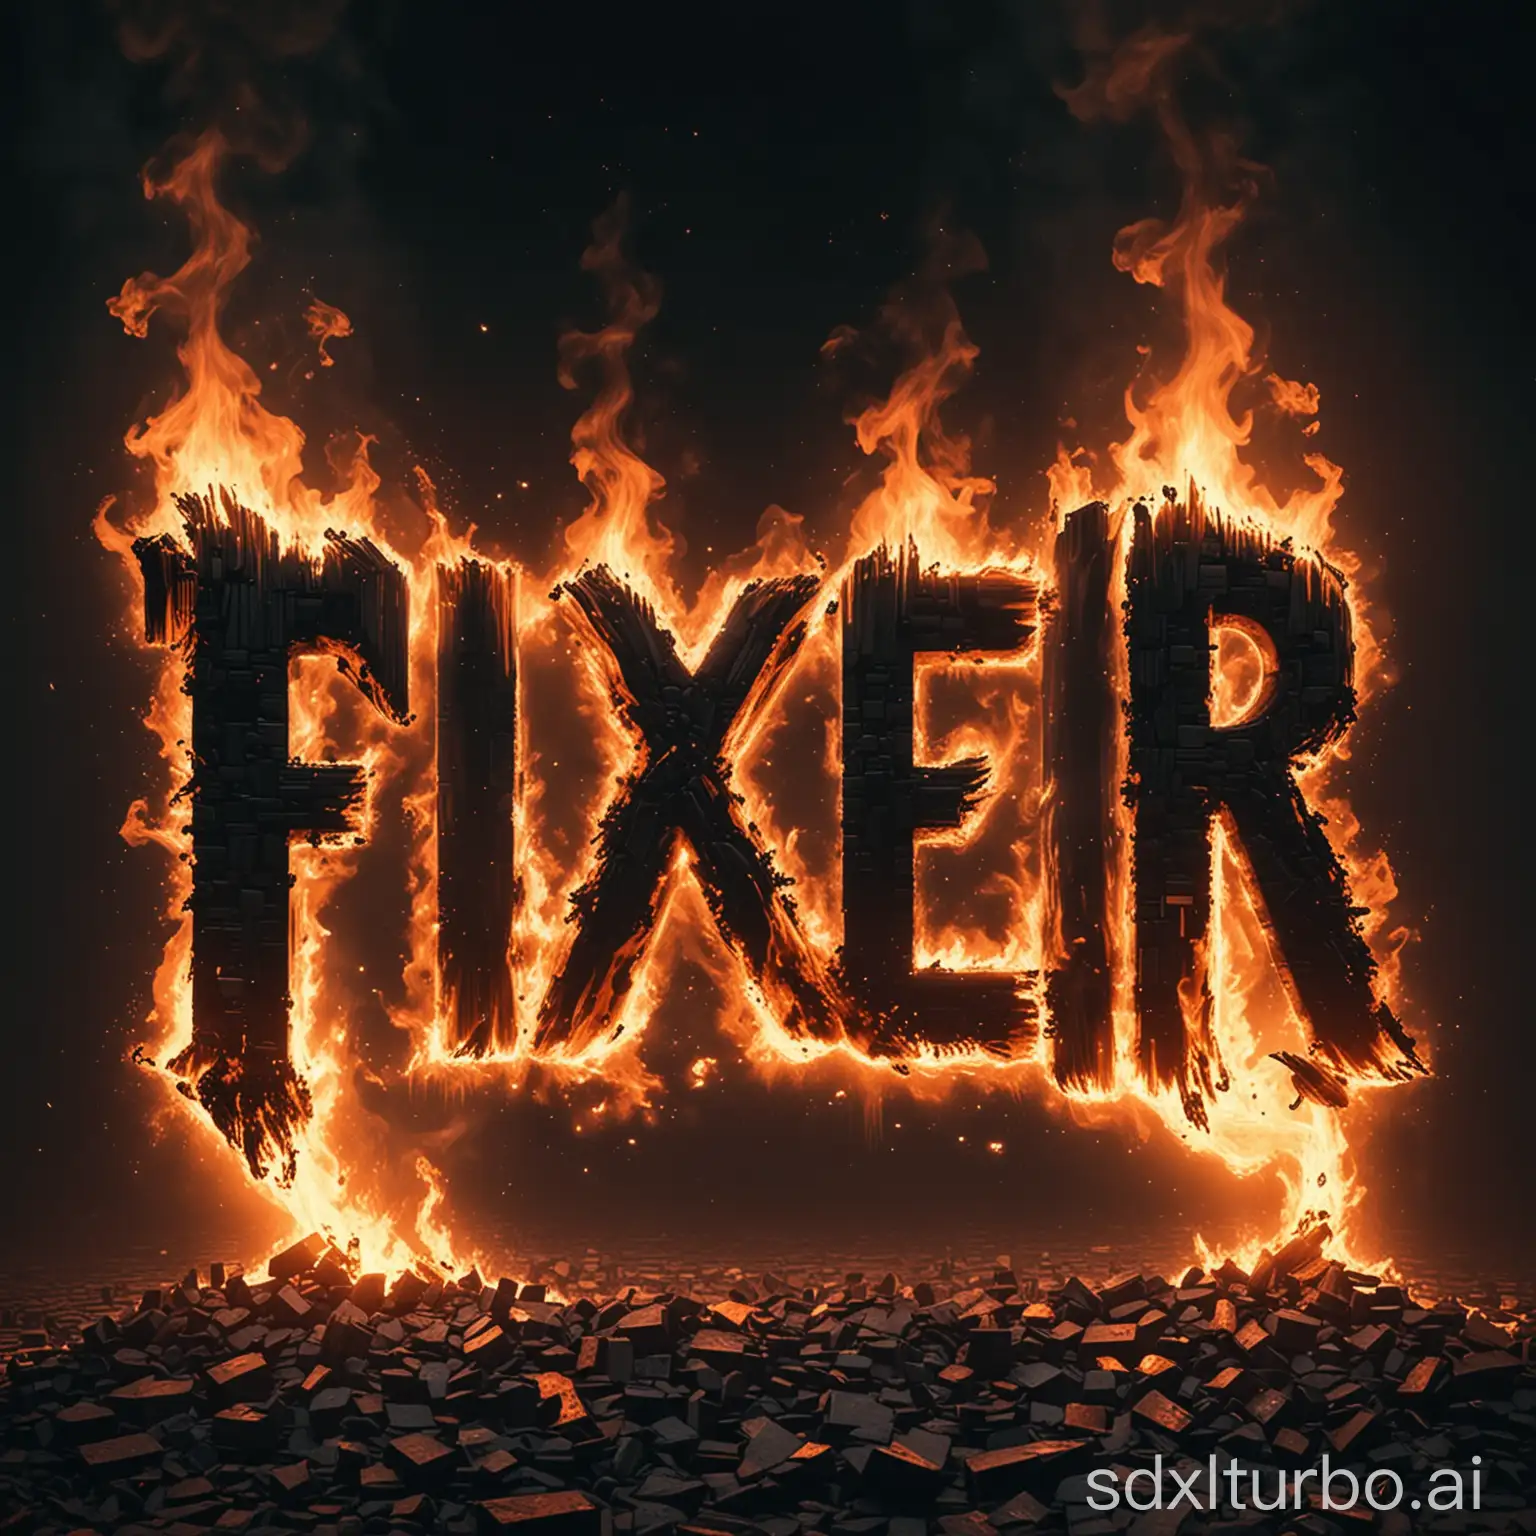 the word fixer on fire glitch effect, distorted effect, some pixelize effects on a dark surface